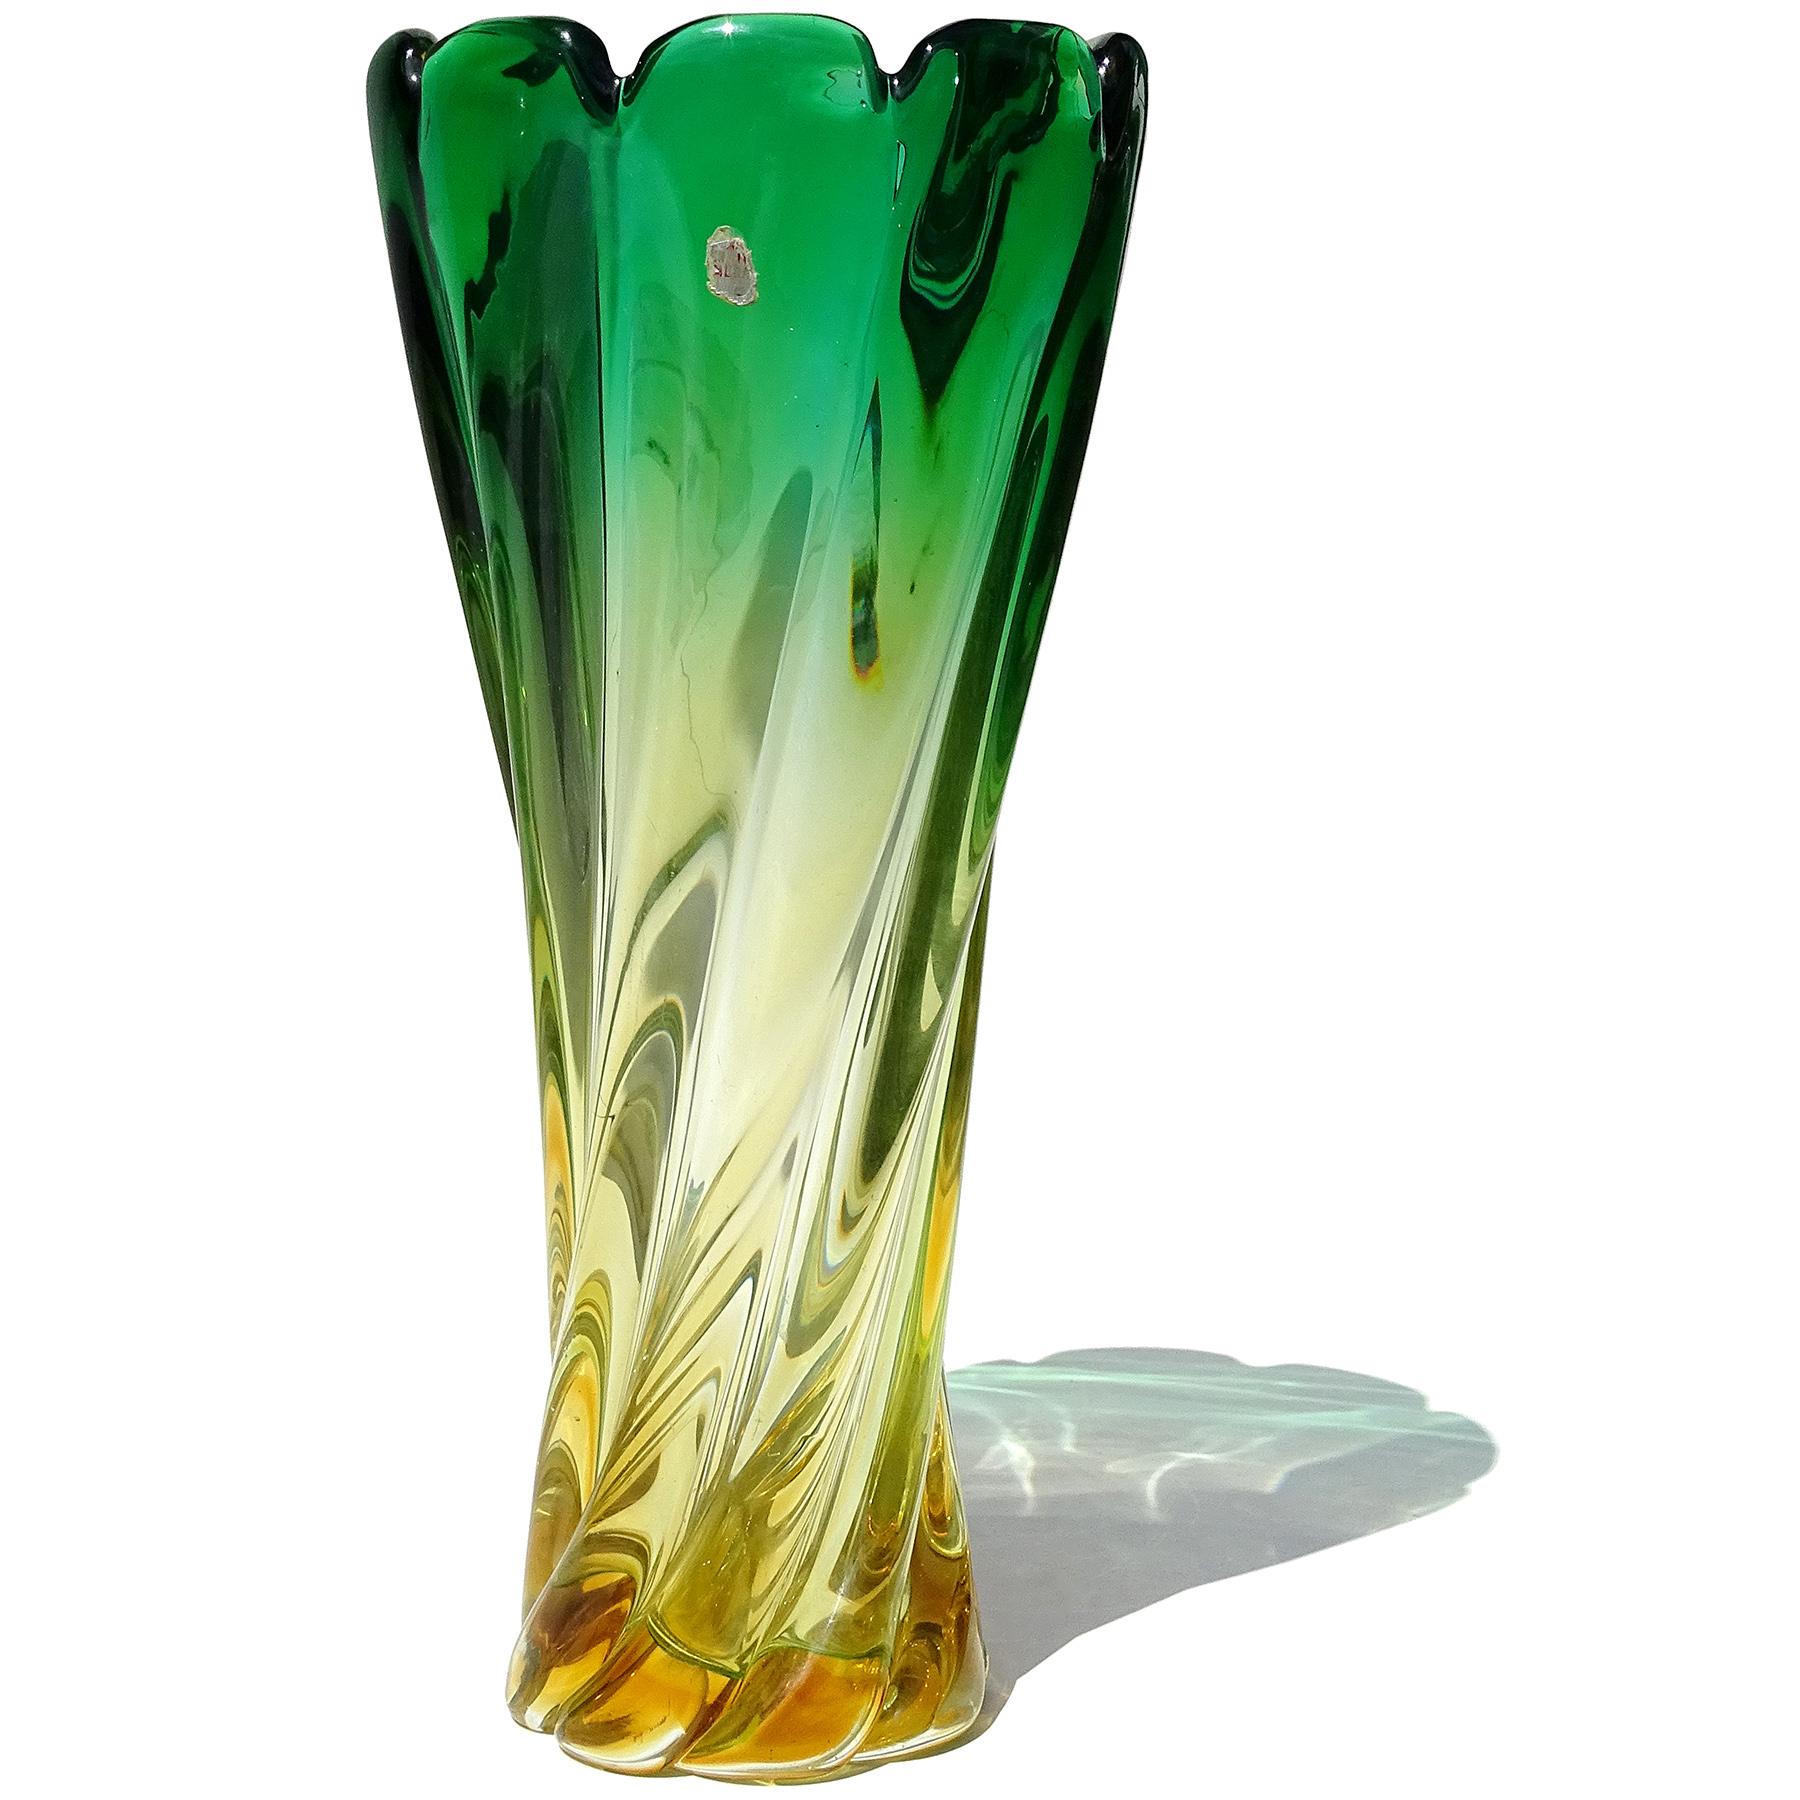 Beautiful vintage Murano hand blown Sommerso green to golden yellow orange Italian art glass flower vase. The vase has a small and worn Murano label on the top front. It also has a swirling ribbed surface, with large open top, looking like an open